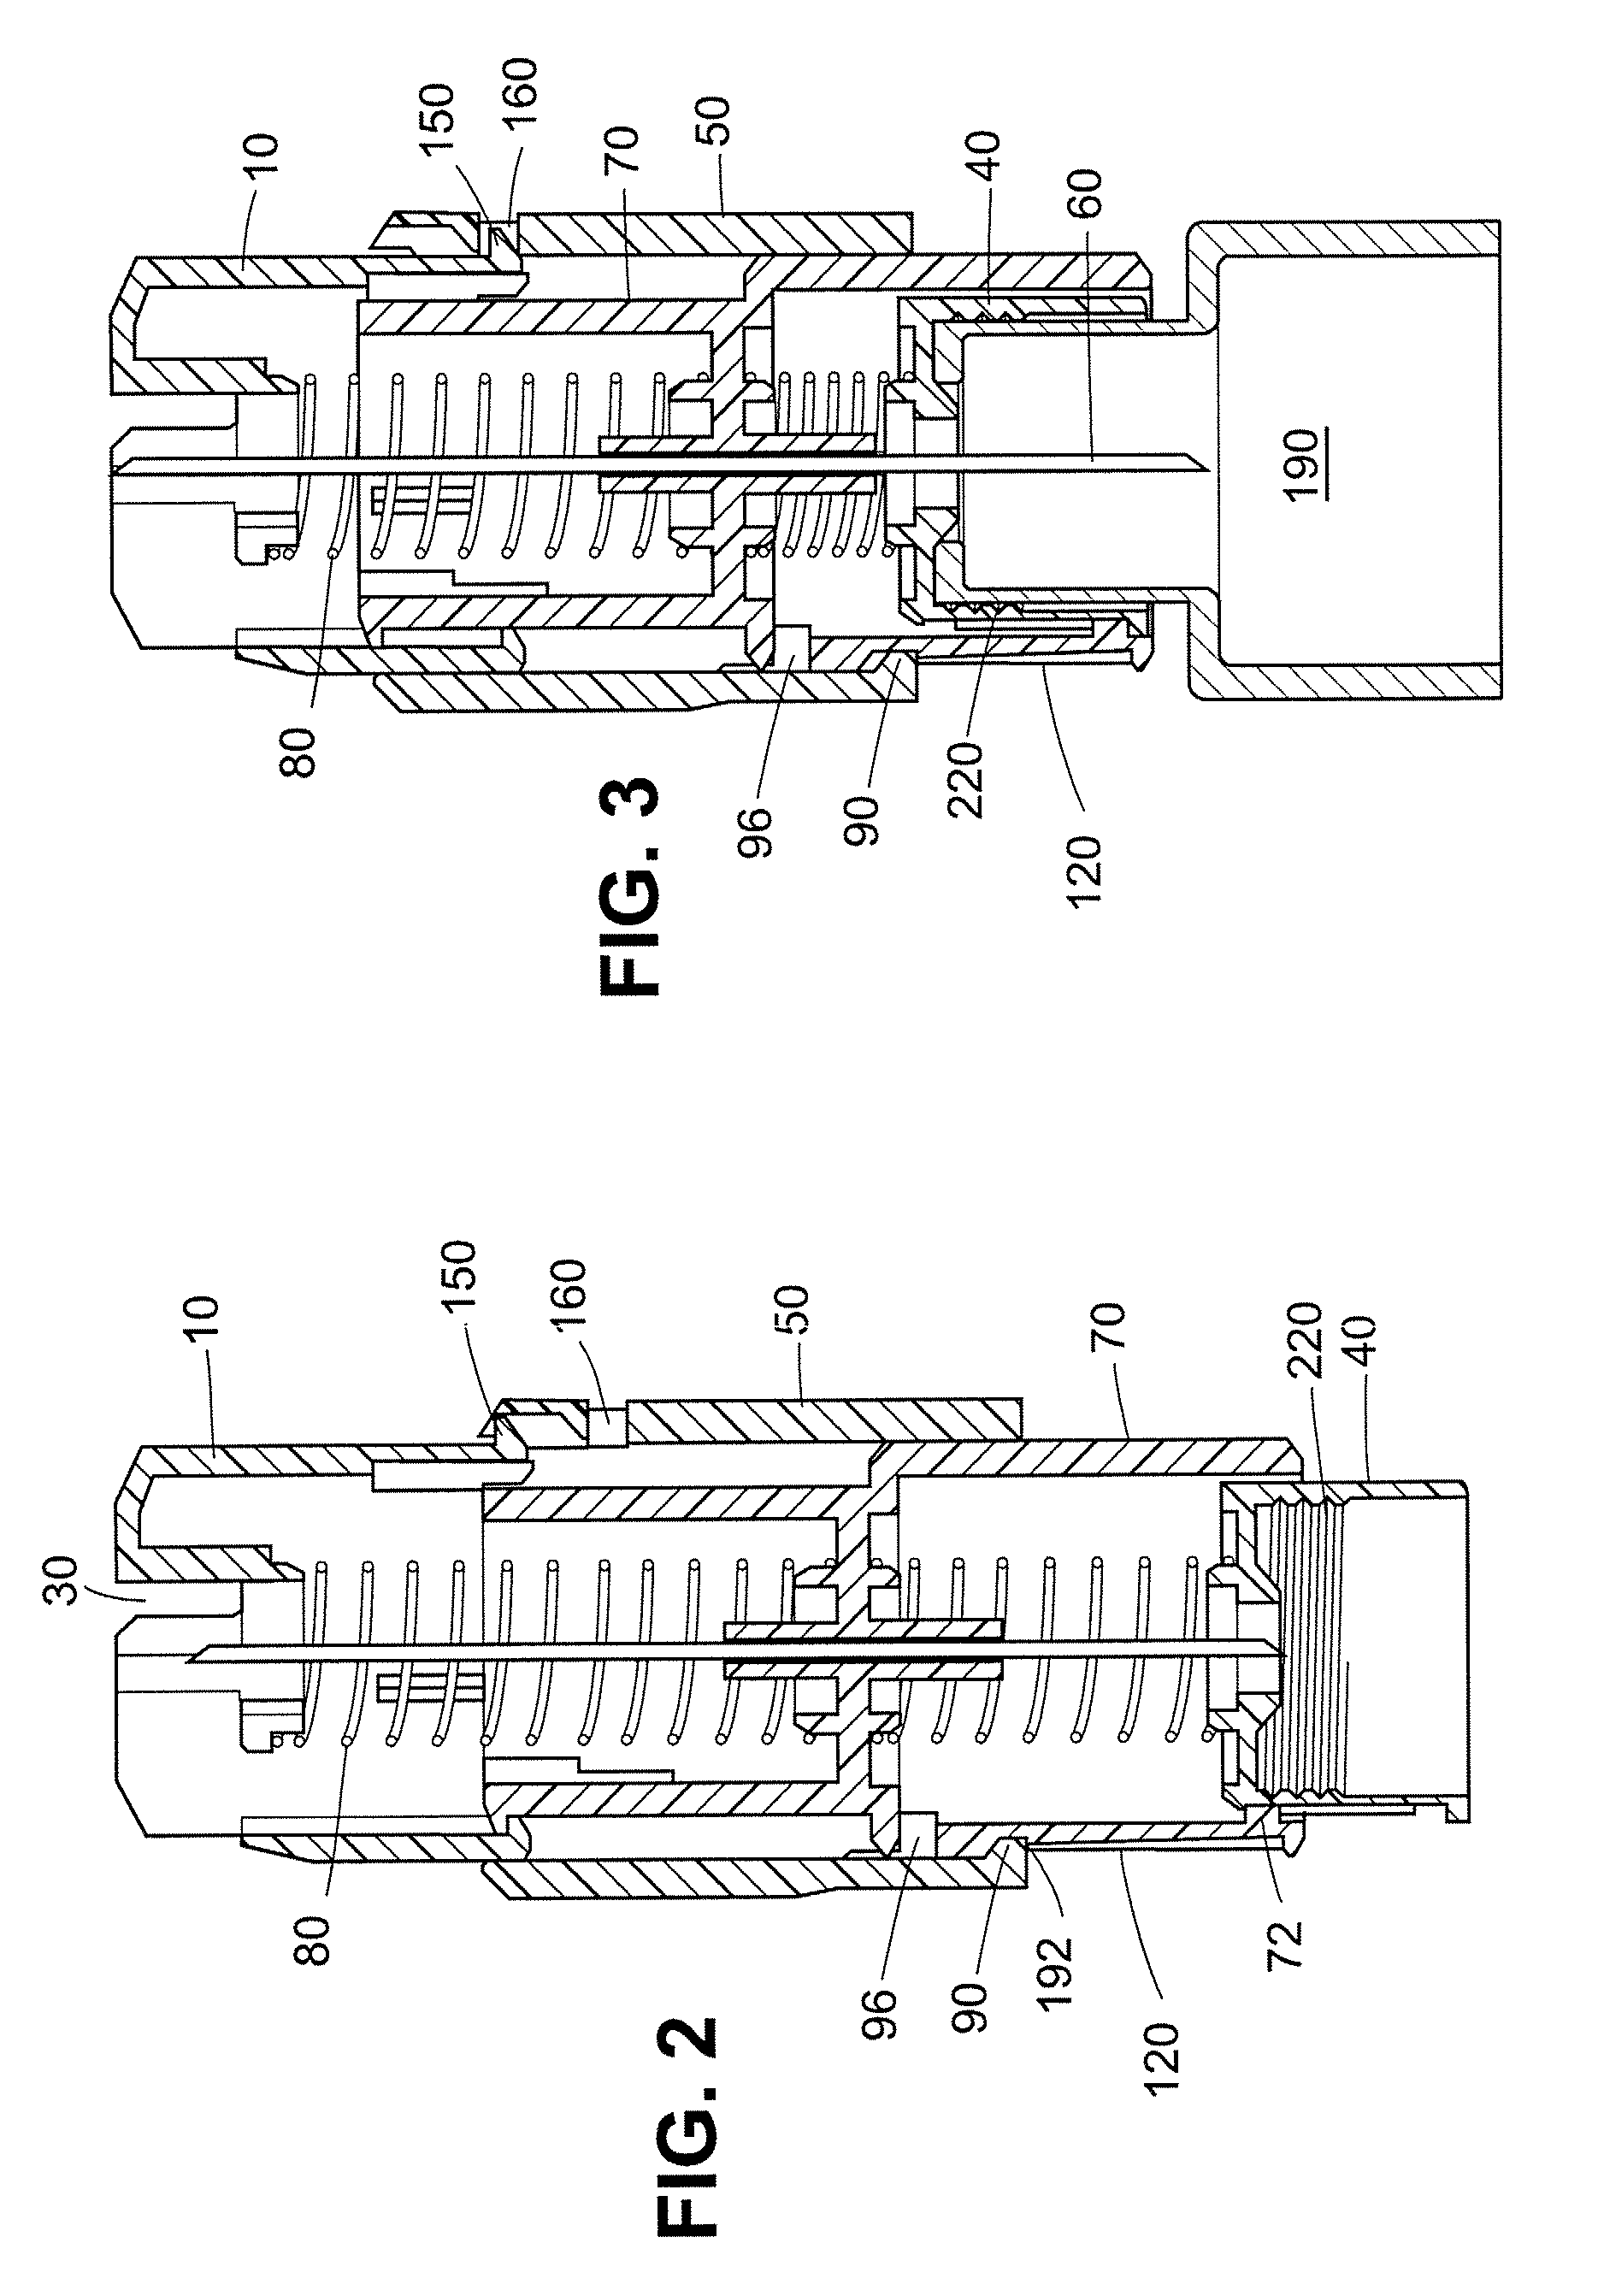 Safety pen needle with passive safety shield system